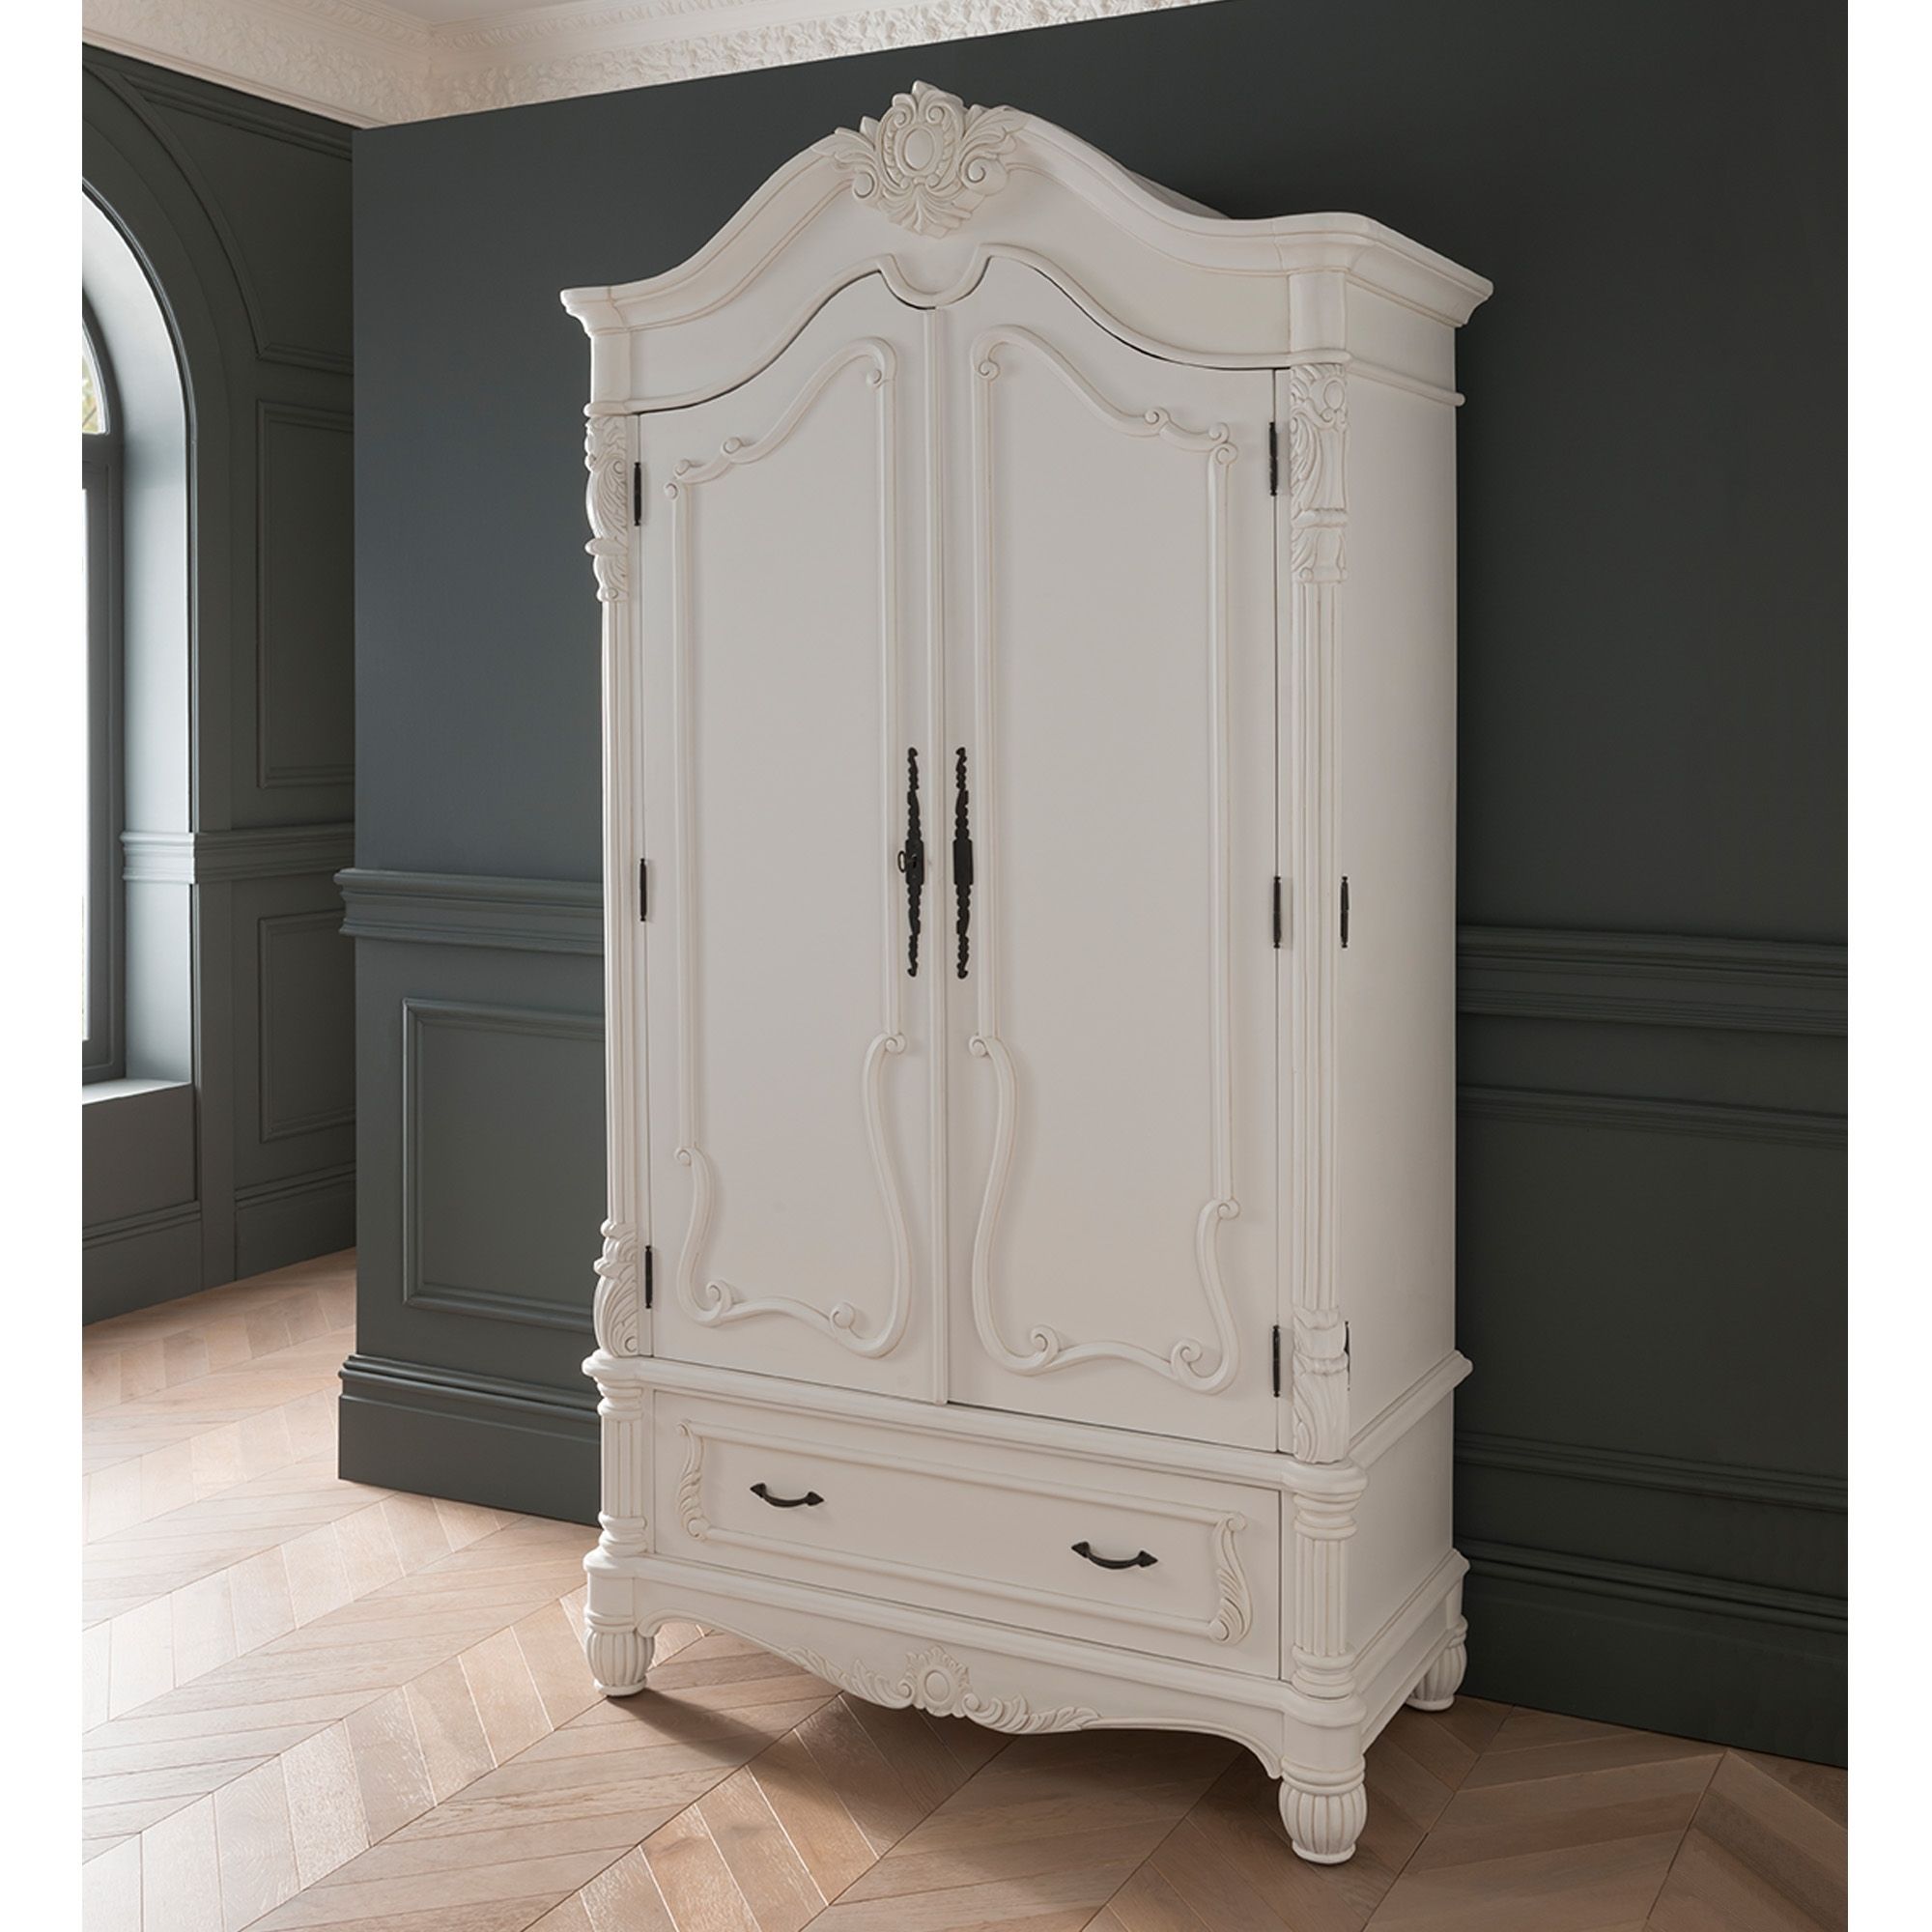 Antique French Style White Finished 1 Drawer Wardrobe | Homesdirect365 For White French Wardrobes (Photo 2 of 15)